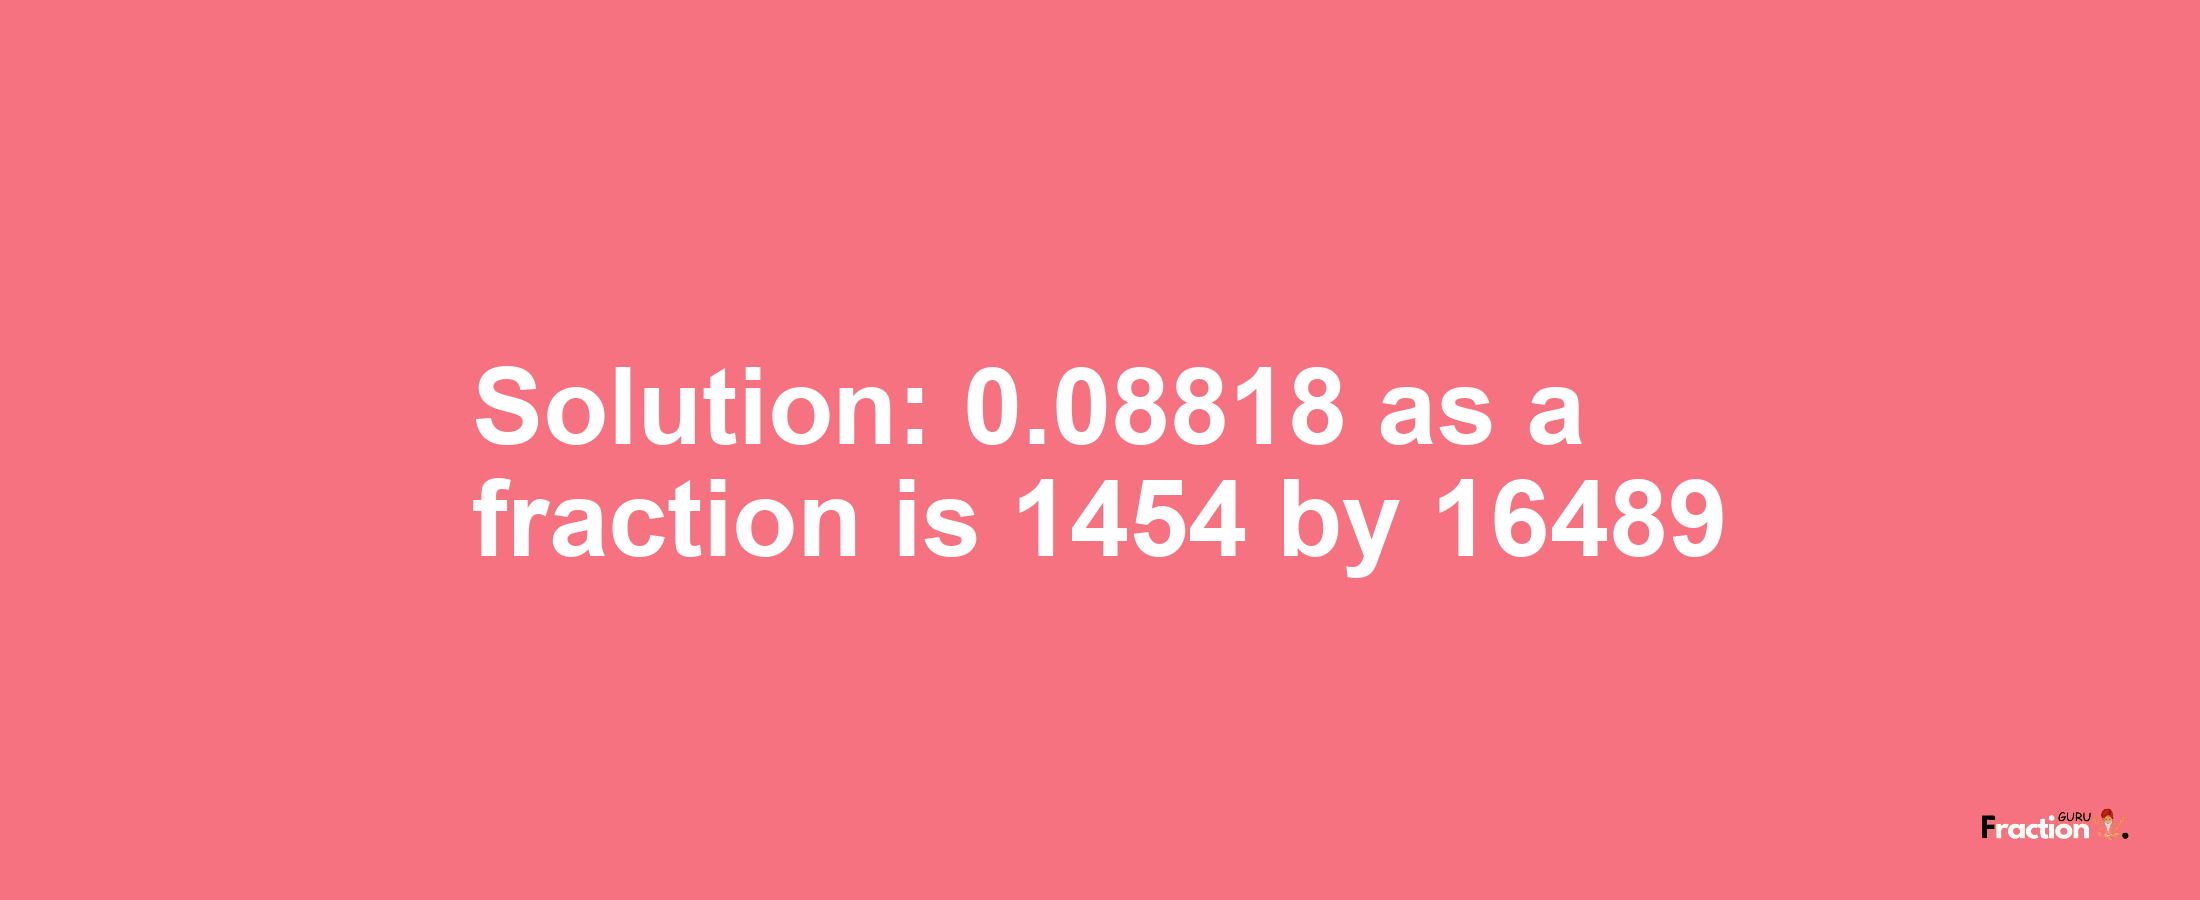 Solution:0.08818 as a fraction is 1454/16489